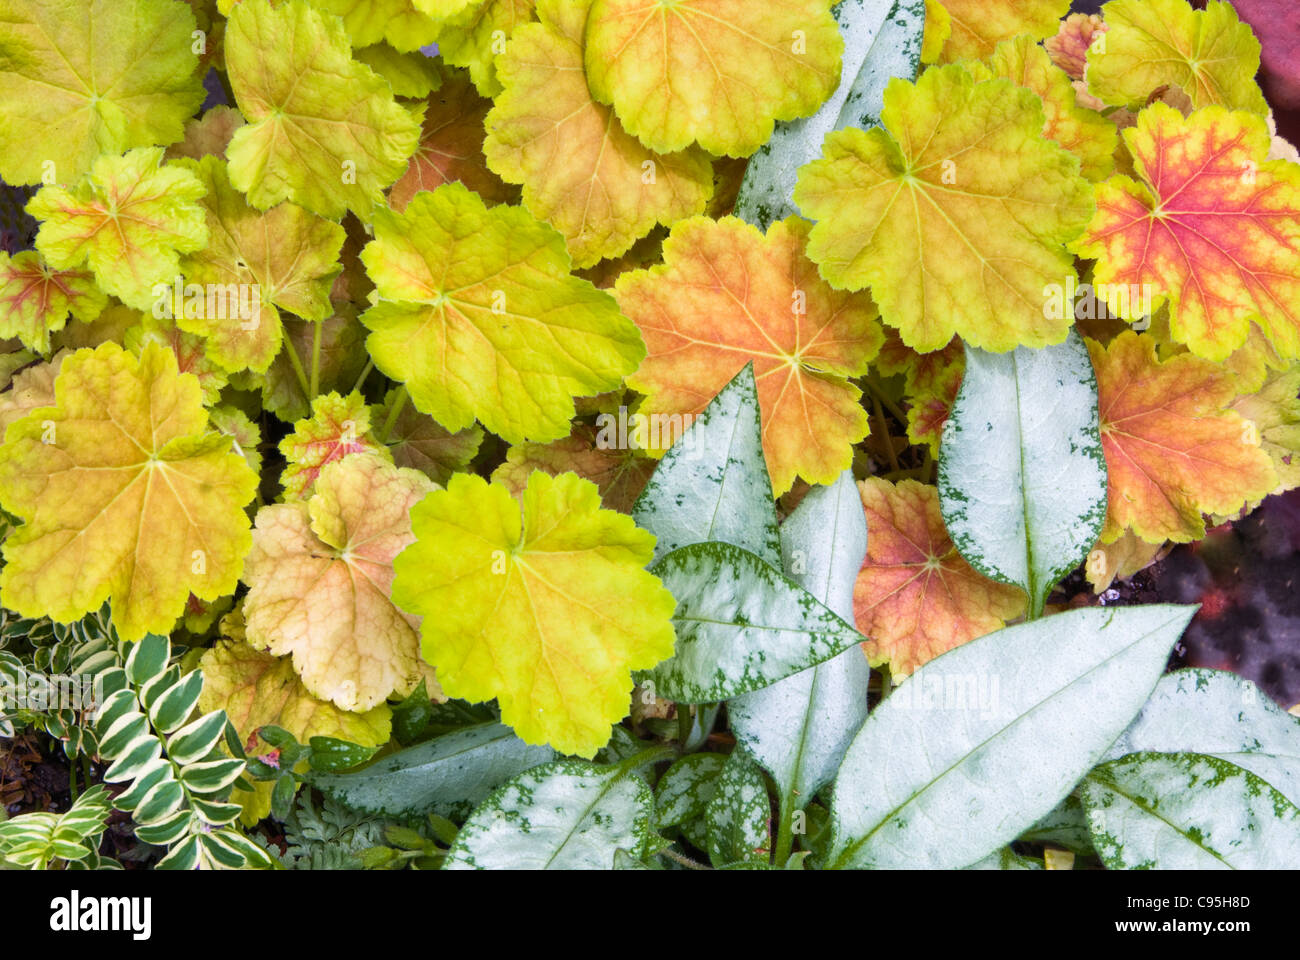 Pulmonaria Cotton Cool & Heuchera Miracle perennial foliage shade plants together, contrast of leaf types, colors, leaves shapes, gold, silver, pink Stock Photo